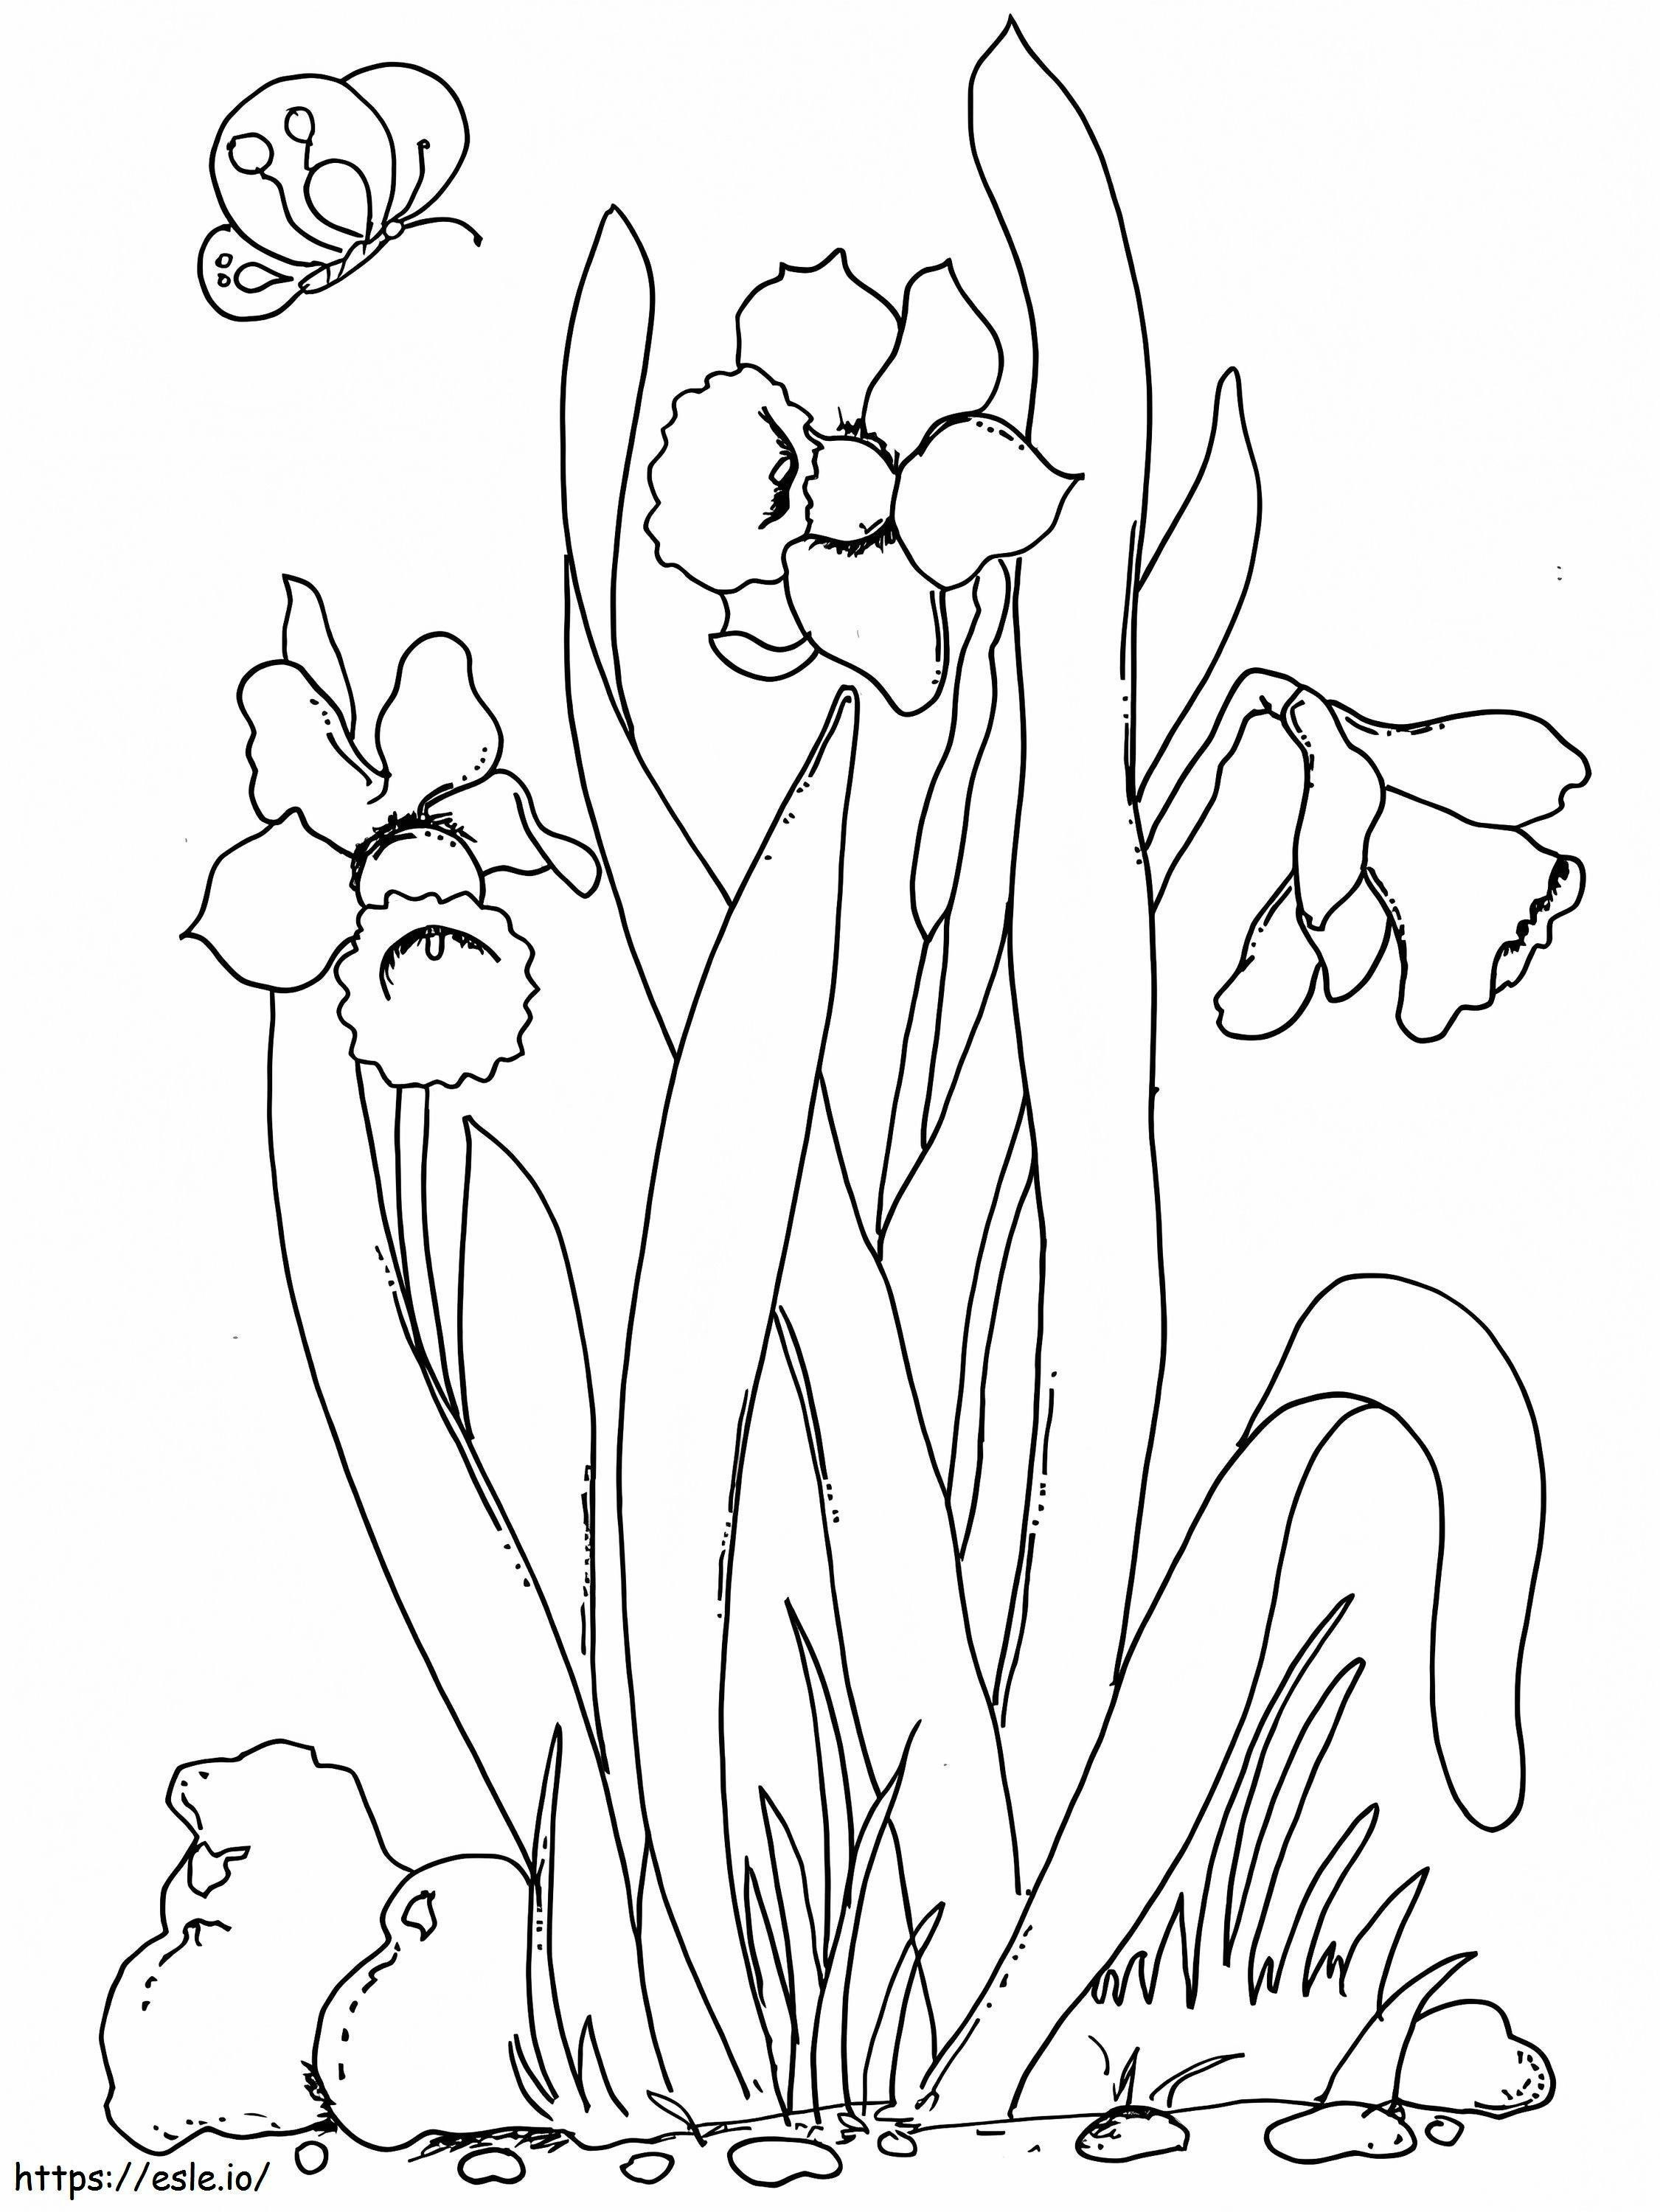 Spring Flowers 1 coloring page